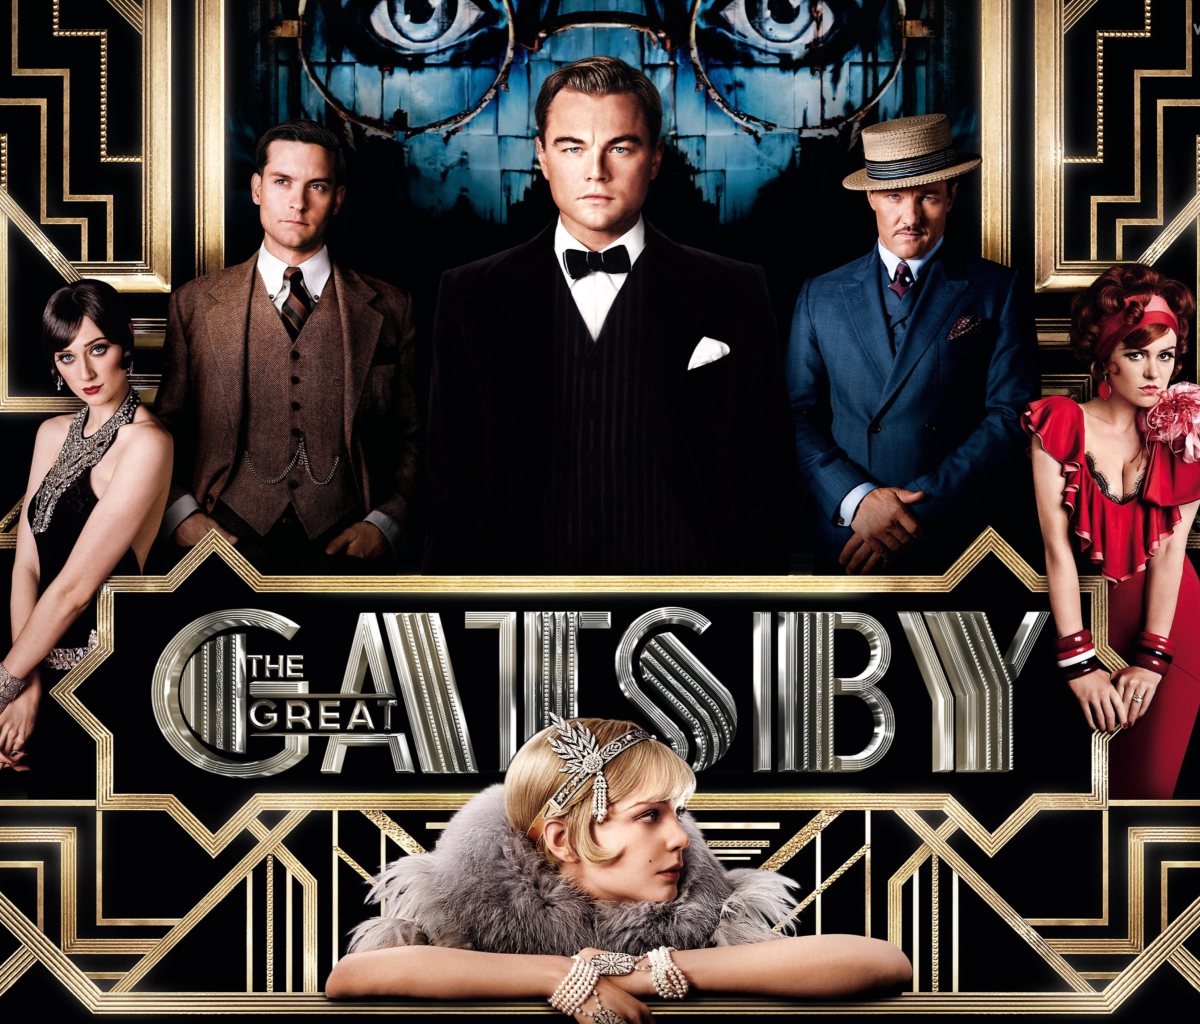 The Great Gatsby Movie wallpaper 1200x1024